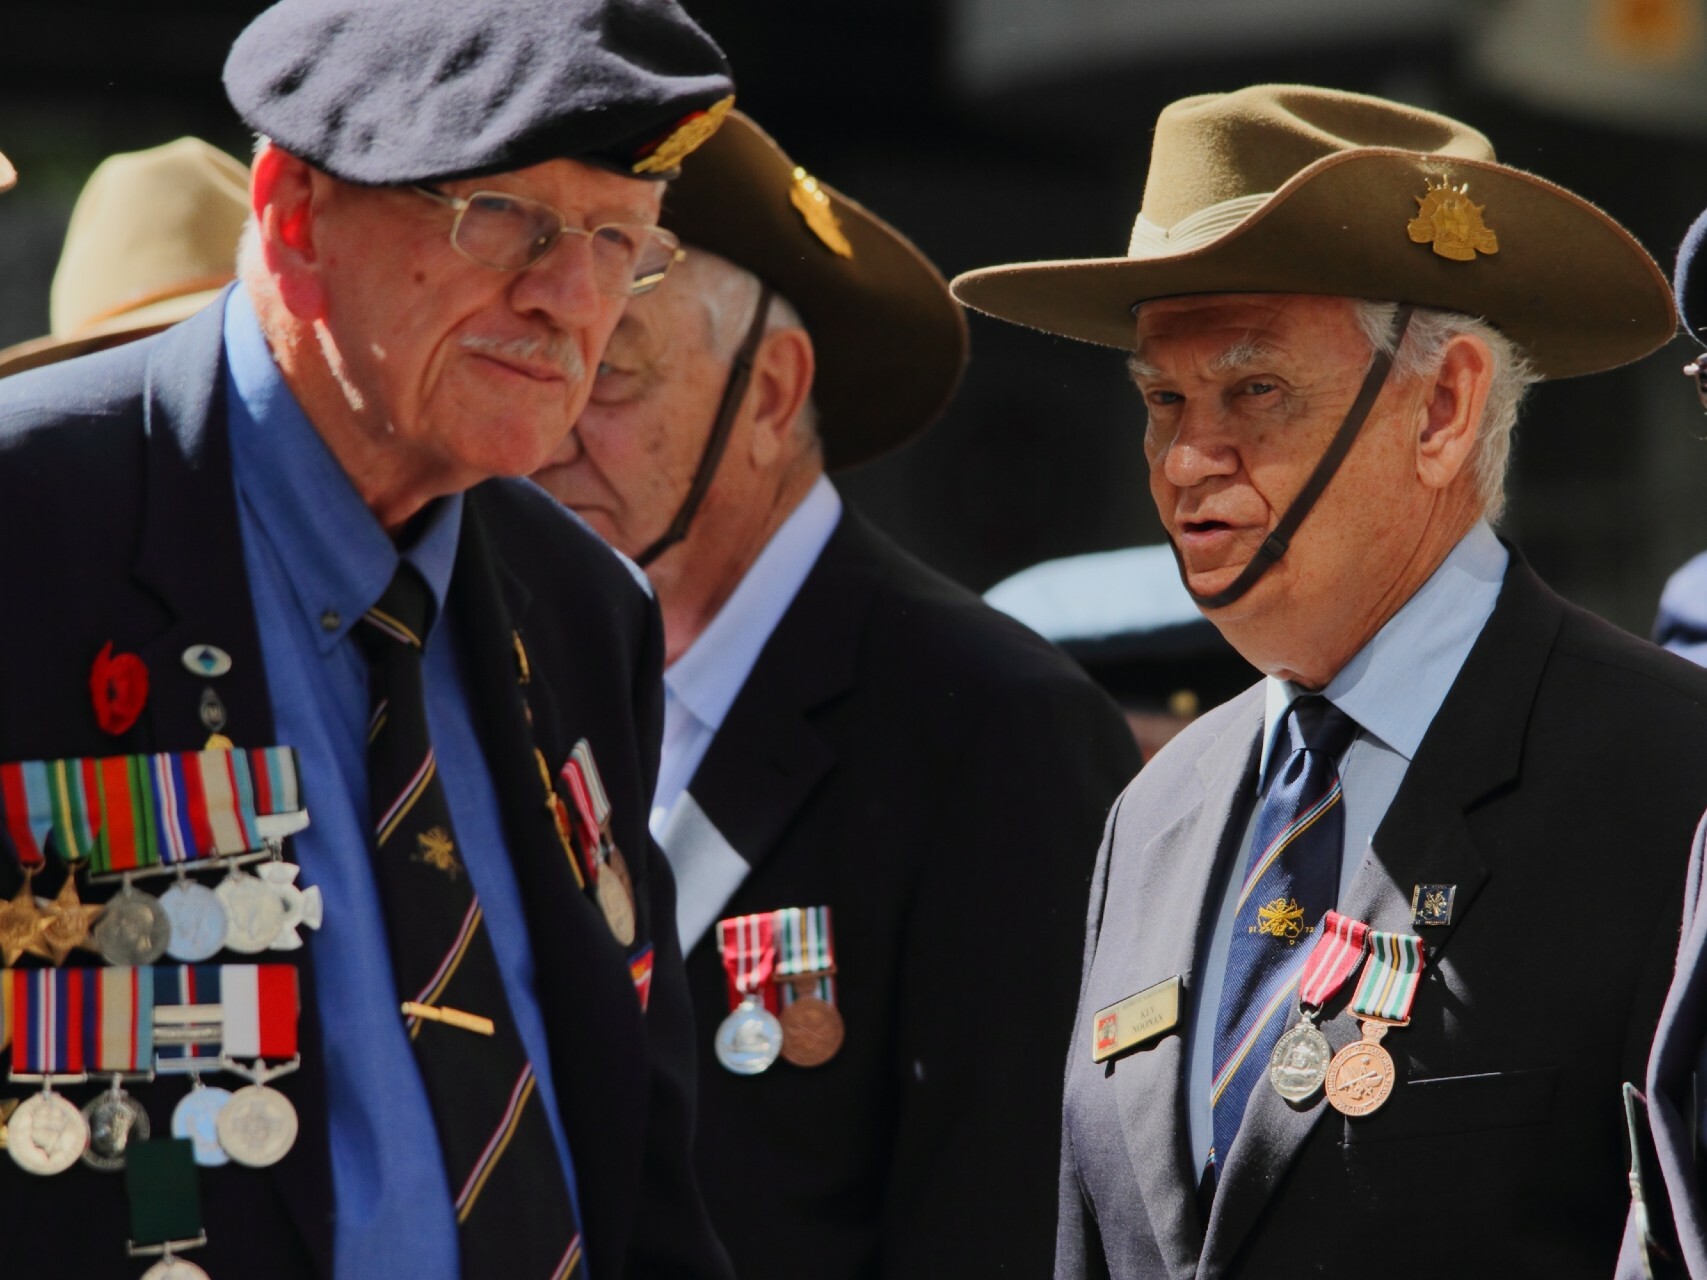 Veterans at an Australian ANZAC Day commemoration event